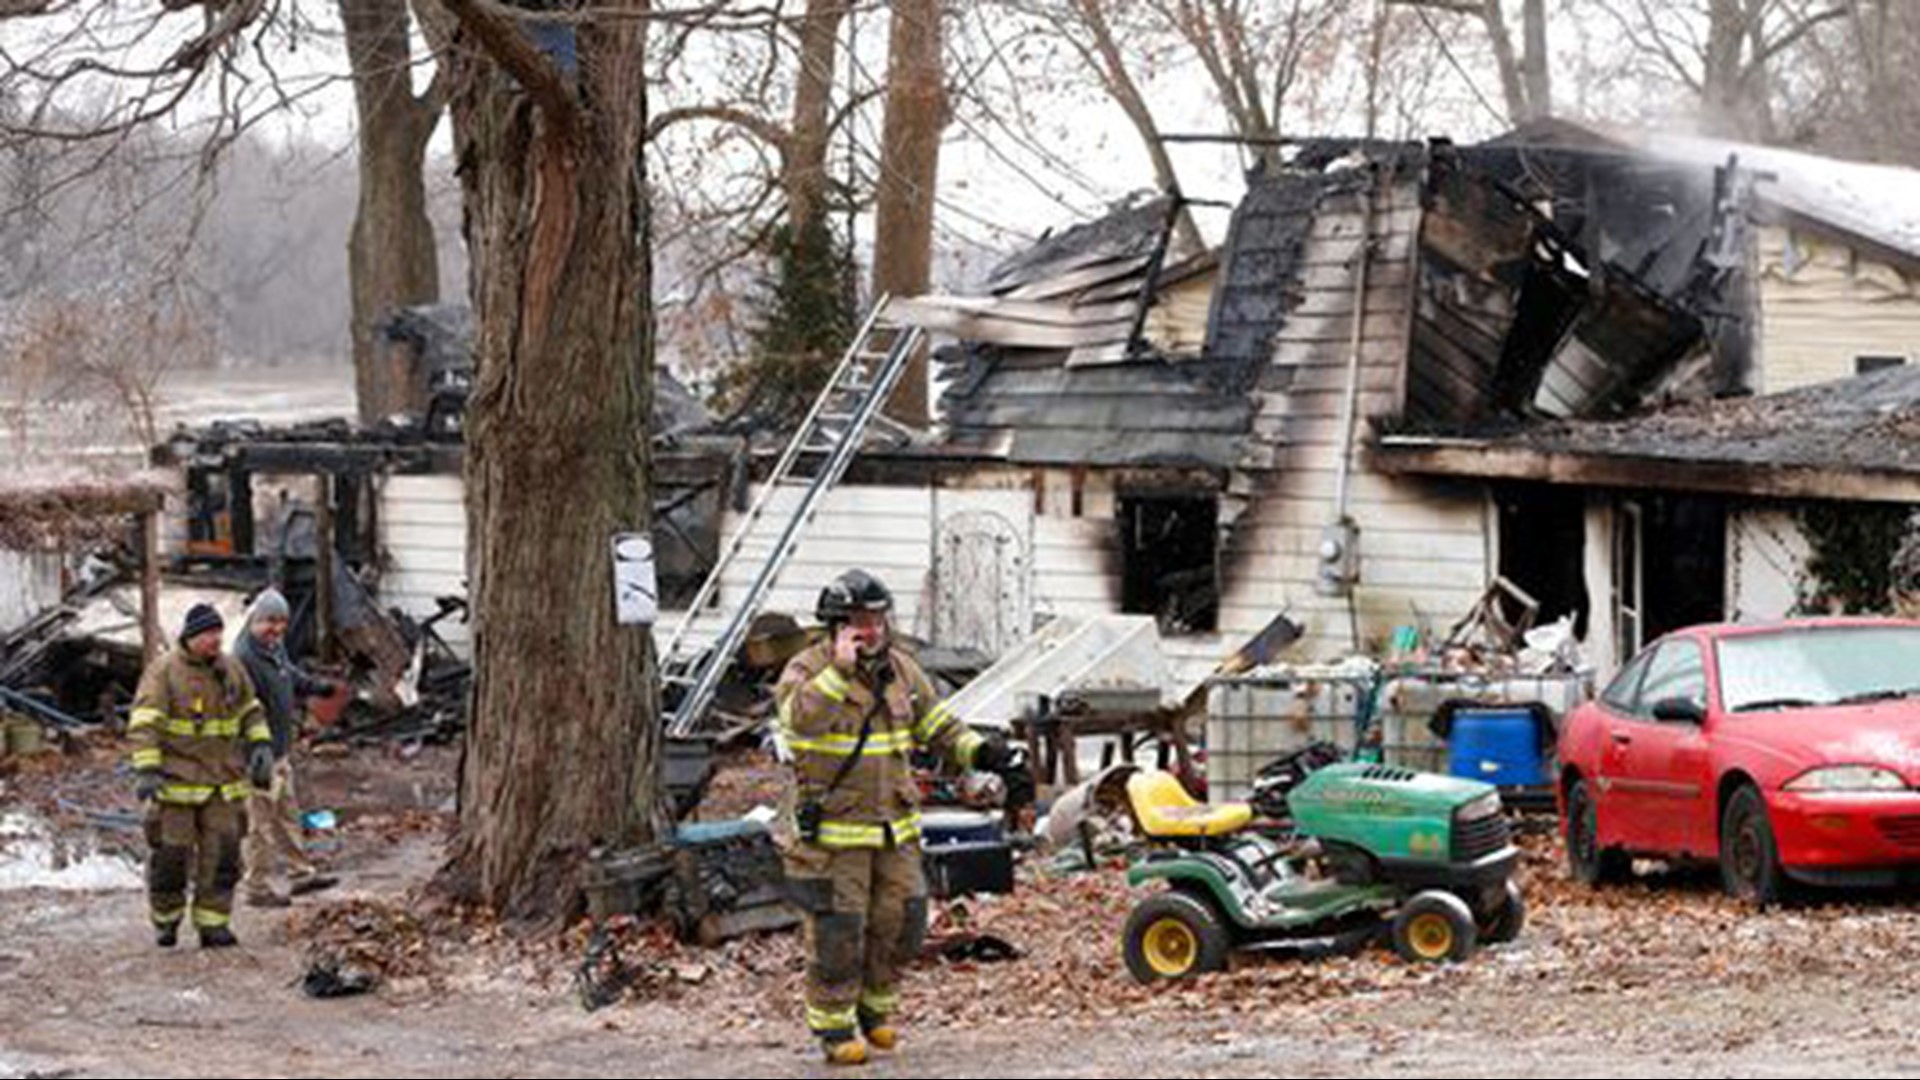 Deadly Indiana house fire under investigation